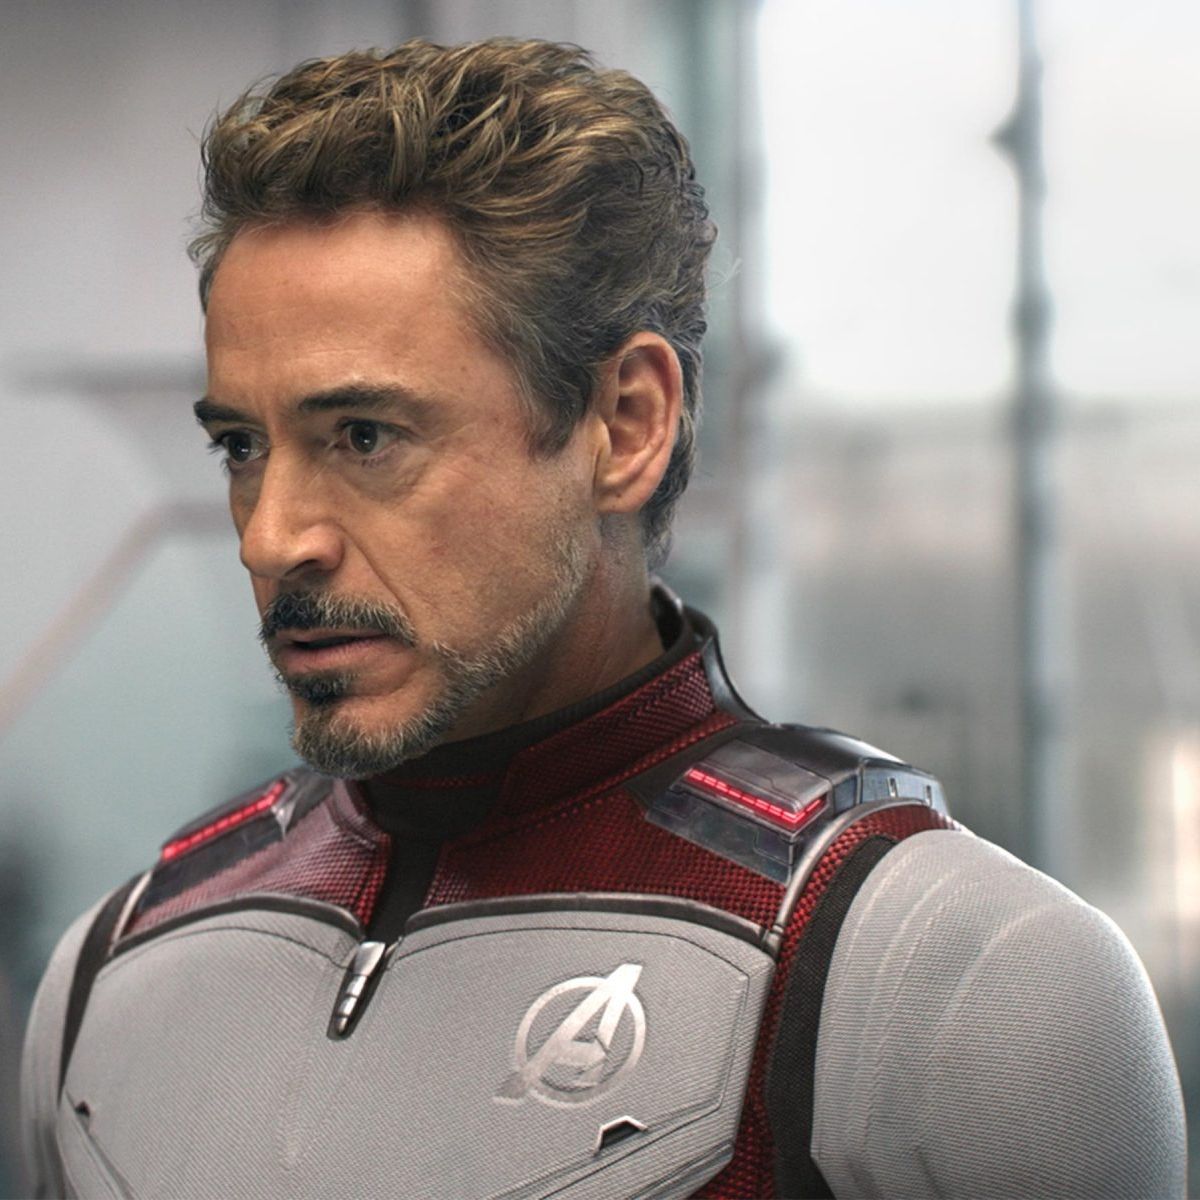 Downey Jr. has also rehabilitated his career, taking on massively successful roles in film.